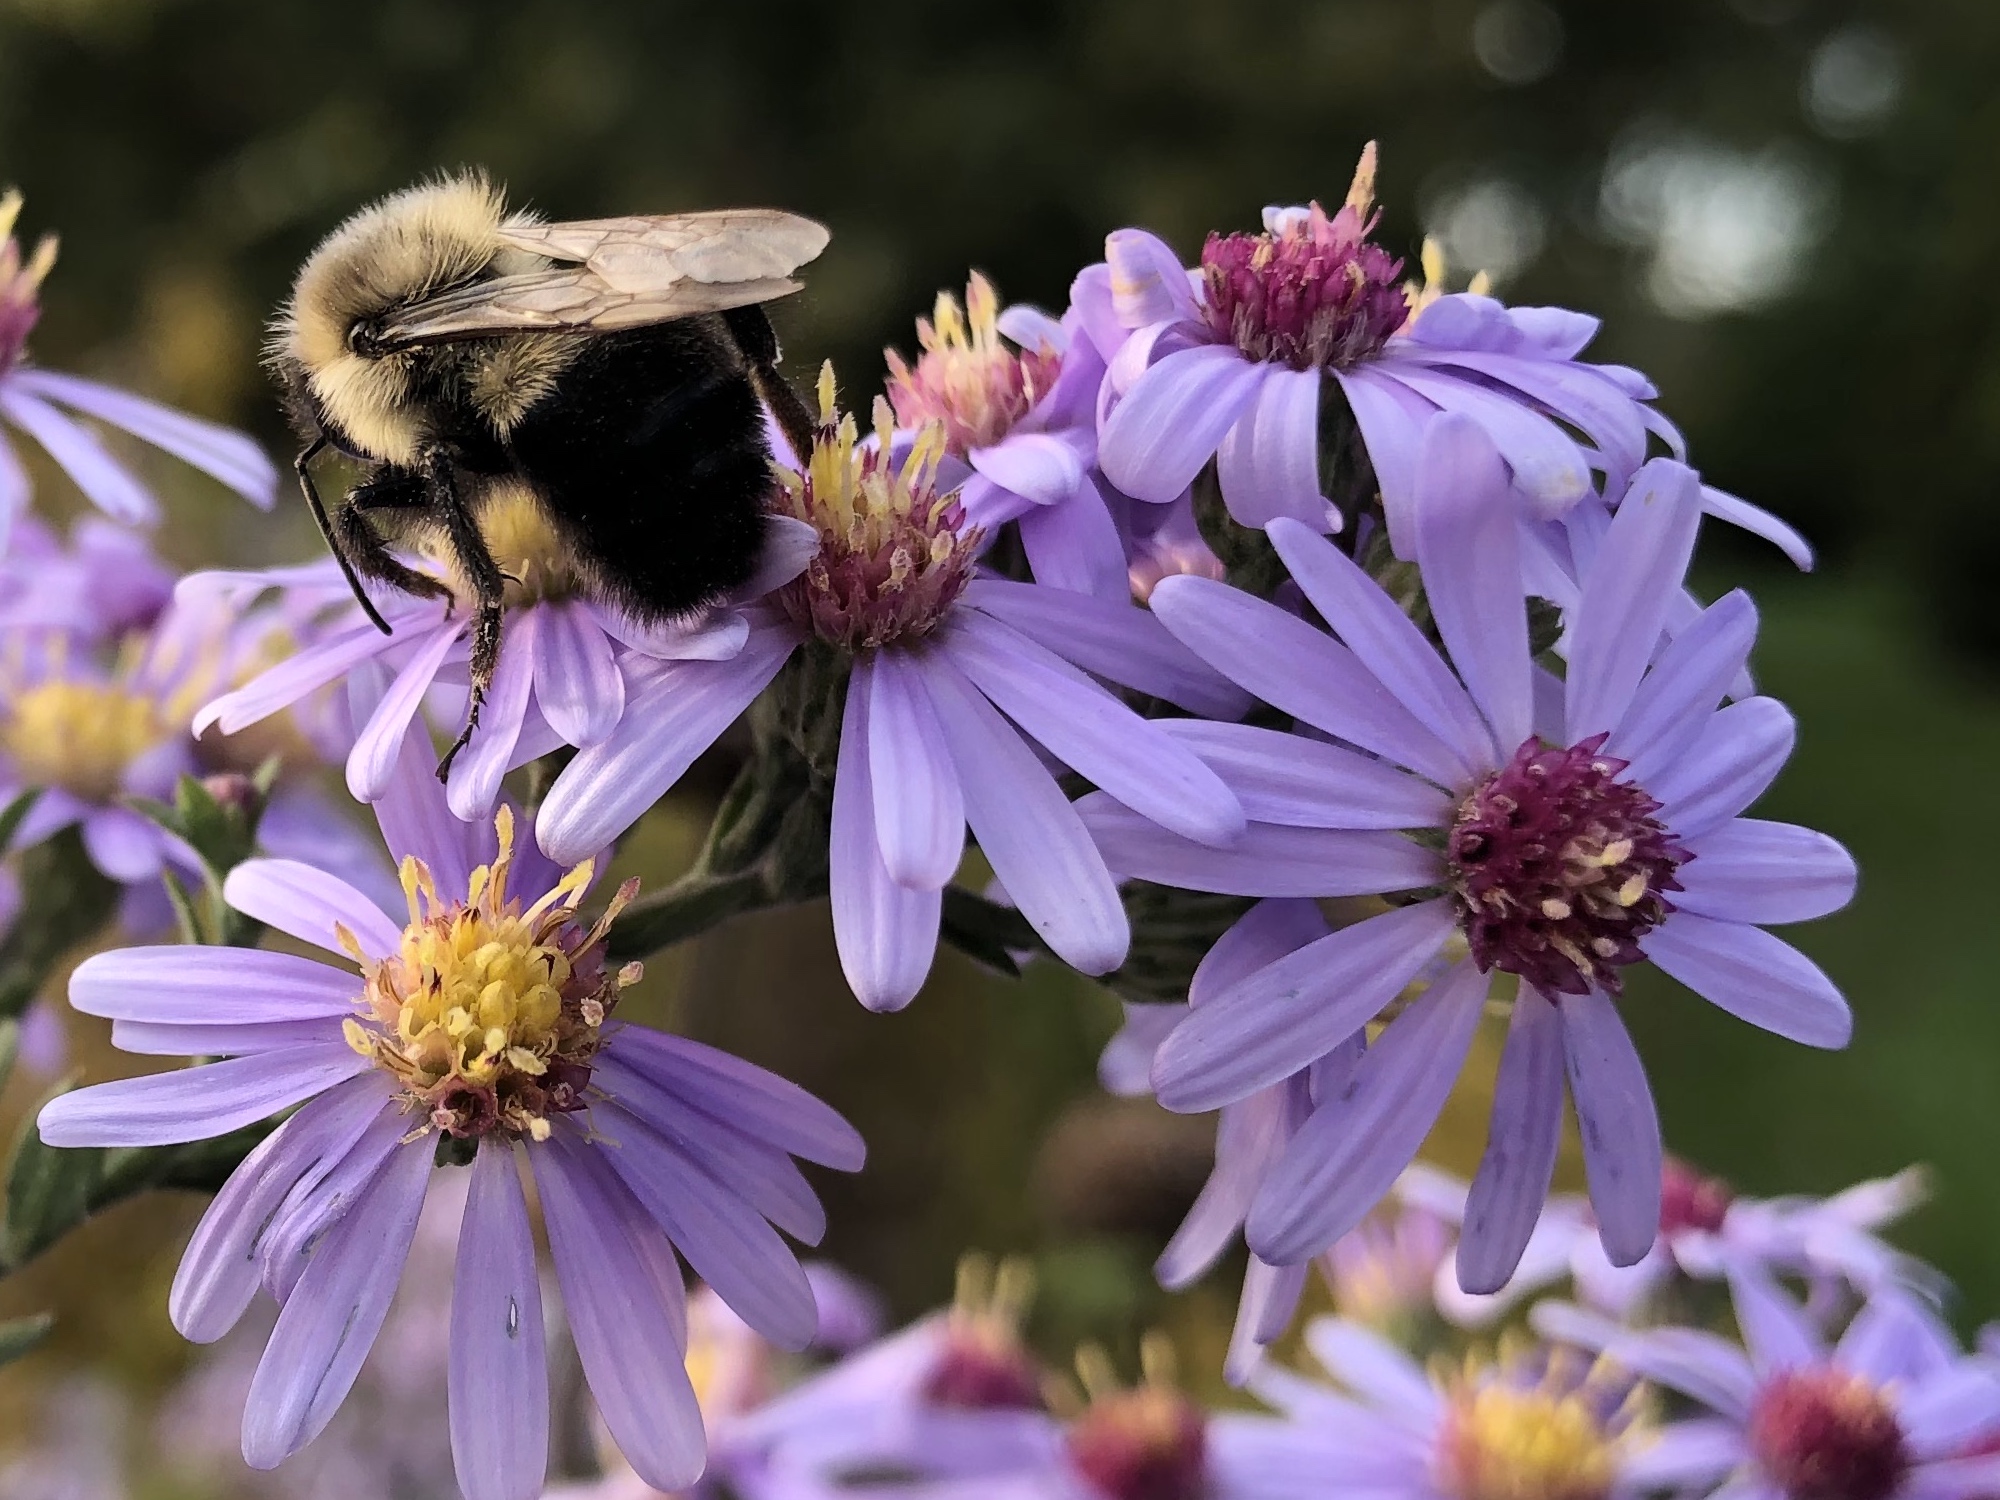 Bumblebee on aster on bank of retaining pond on October 6, 2020.